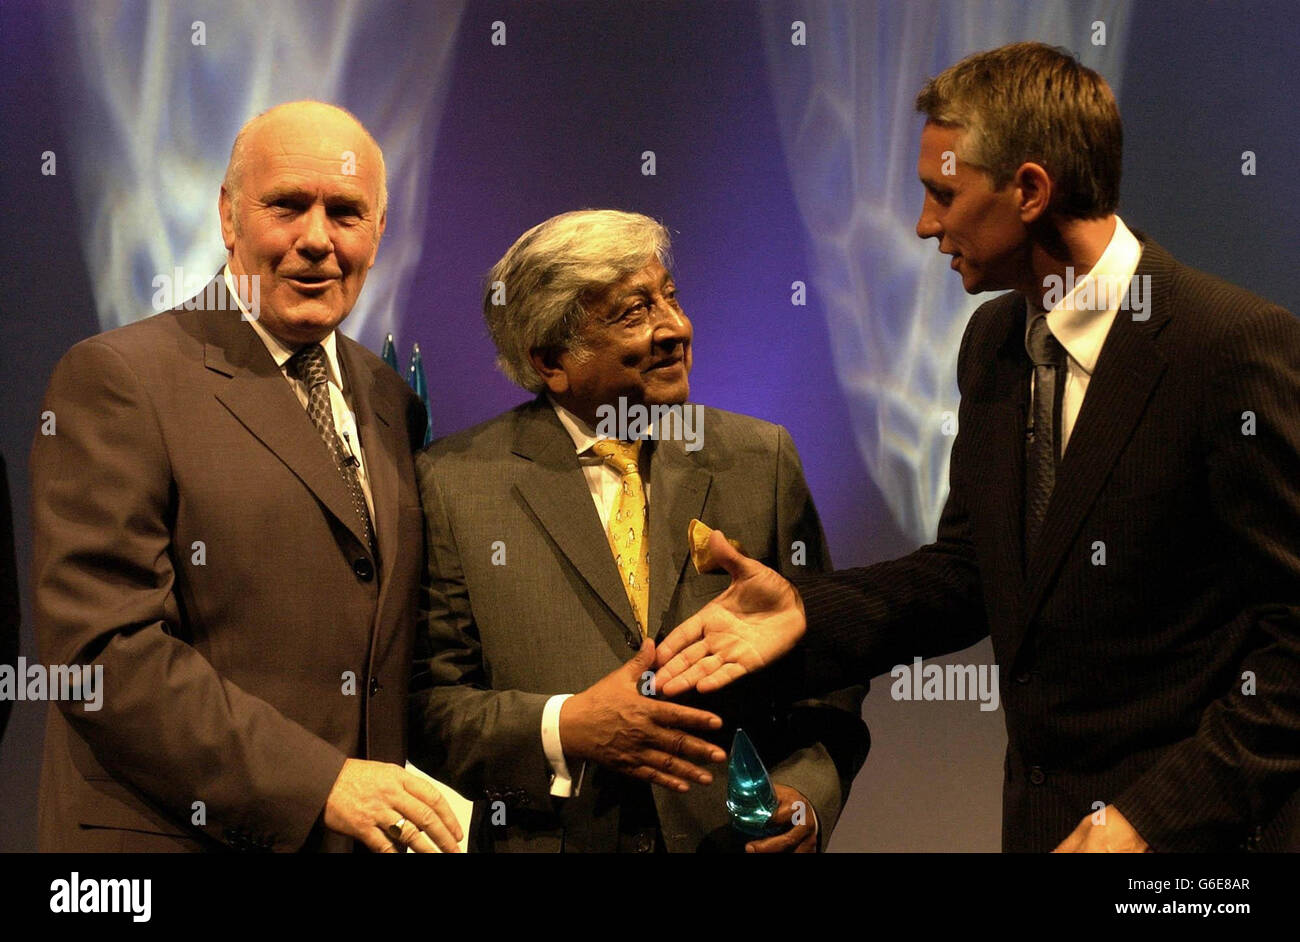 Dr Arun Bakasi, a Consultant Physician at the Isle of Wight Healthcare Trust, receives the Outstanding Achiever Award for a Doctor from the Secretary of State for Health, Dr John Reid, and Gary Lineker, at the Health and Social Care Awards. * at Old Billingsgate Market, London. The awards recognise Health Care professionals who have pioneered new services for their patients. Stock Photo